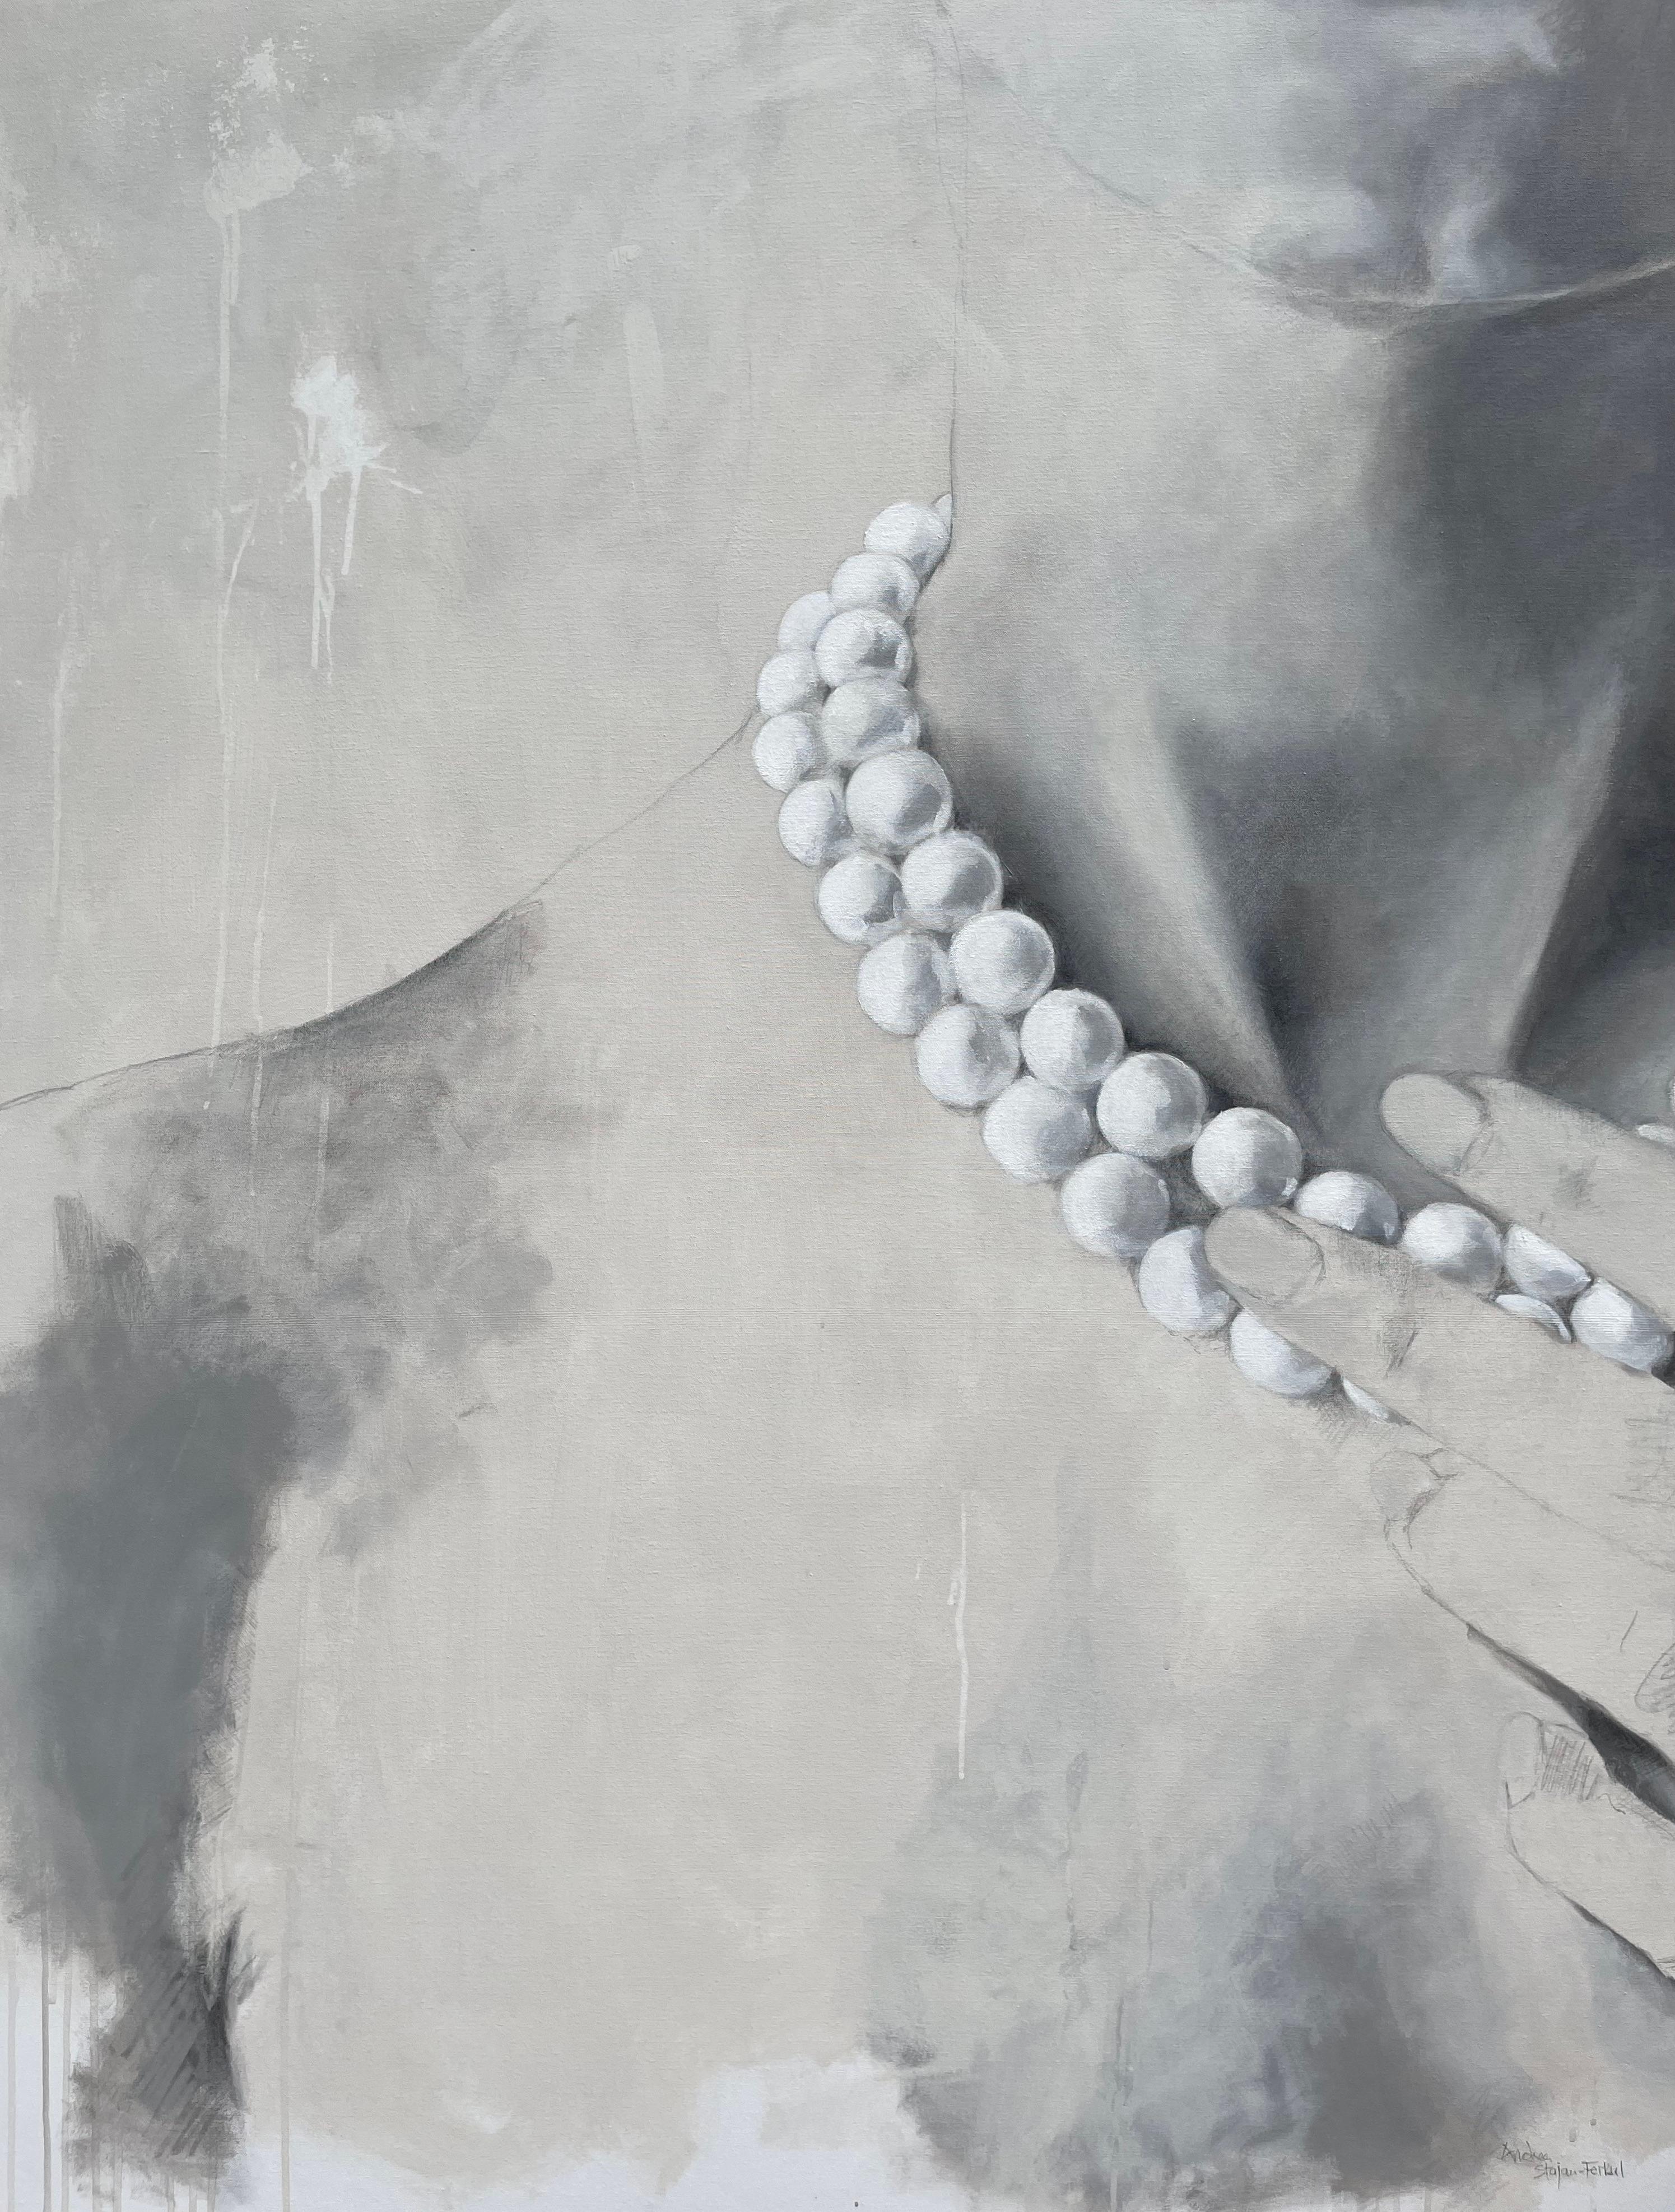 Wrap Yourself Around Me, 48"x60", Pearls, Acrylic, Pencil, White, Beige Painting - Art by Andrea Stajan-Ferkul